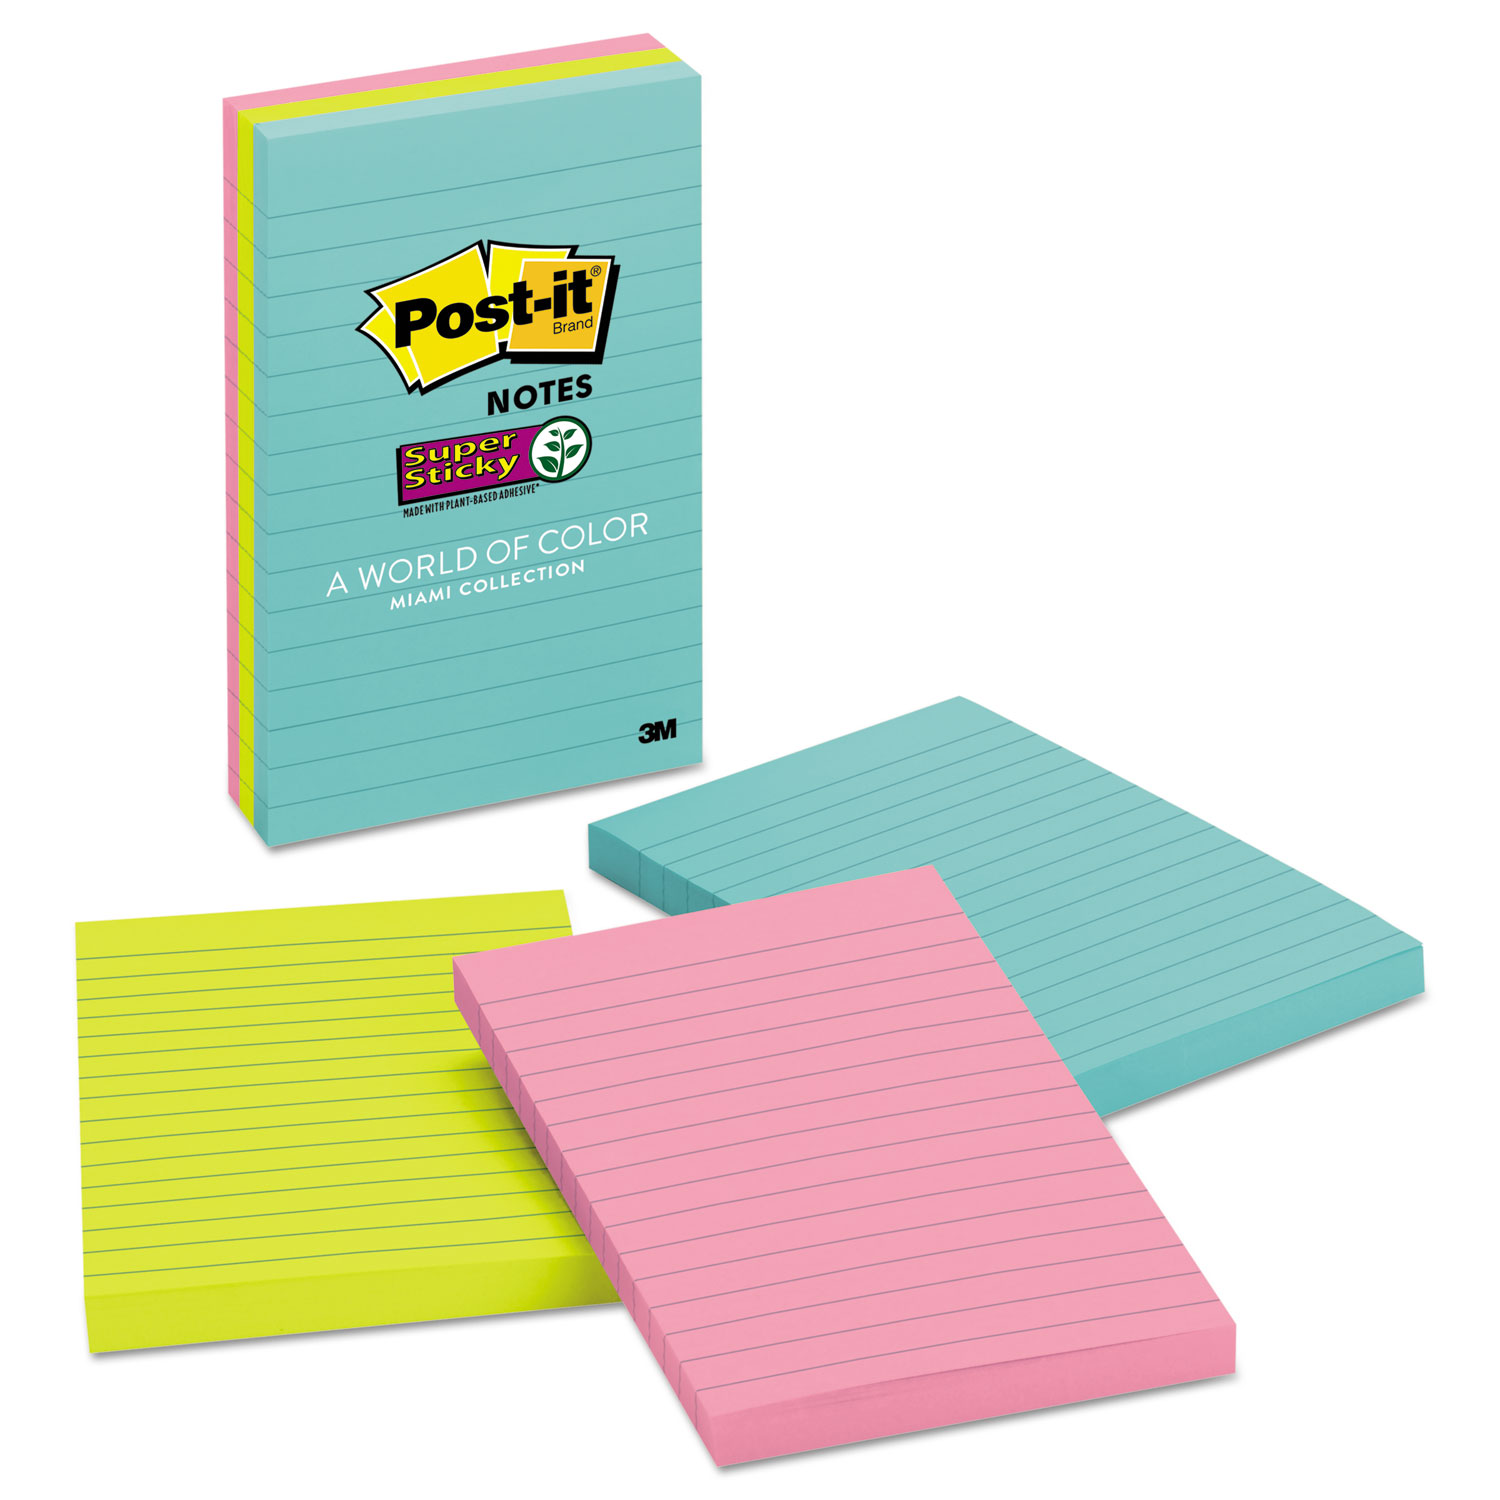  Post-it Notes Super Sticky 660-3SSMIA Pads in Miami Colors, 4 x 6, 90/Pad, 3 Pads/Pack (MMM6603SSMIA) 